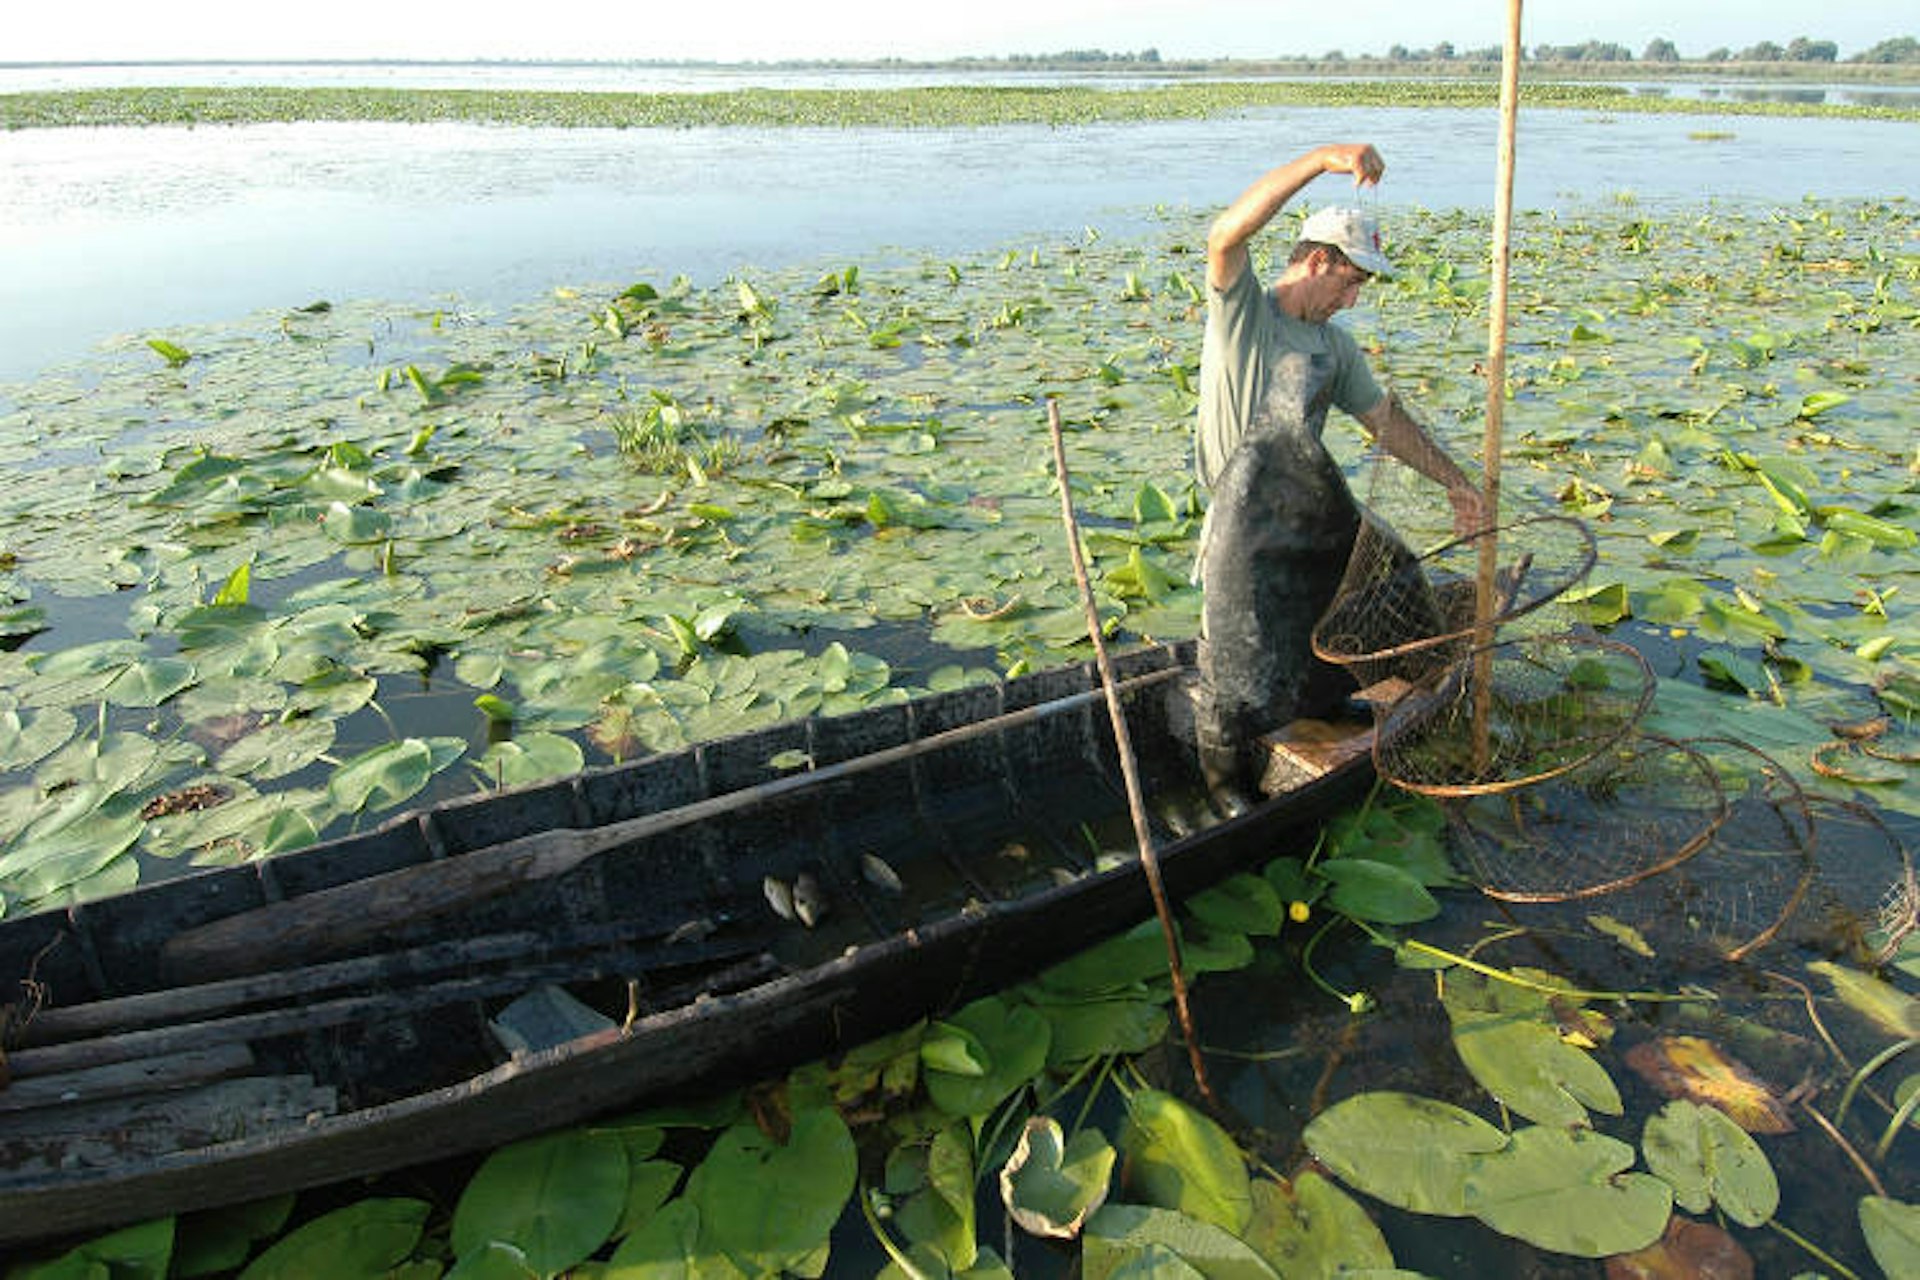 Canoe fishing among water lilies on Lake Isac in the Danube Delta. Image by Eye Ubiquitous / Universal Images Group / Getty Images